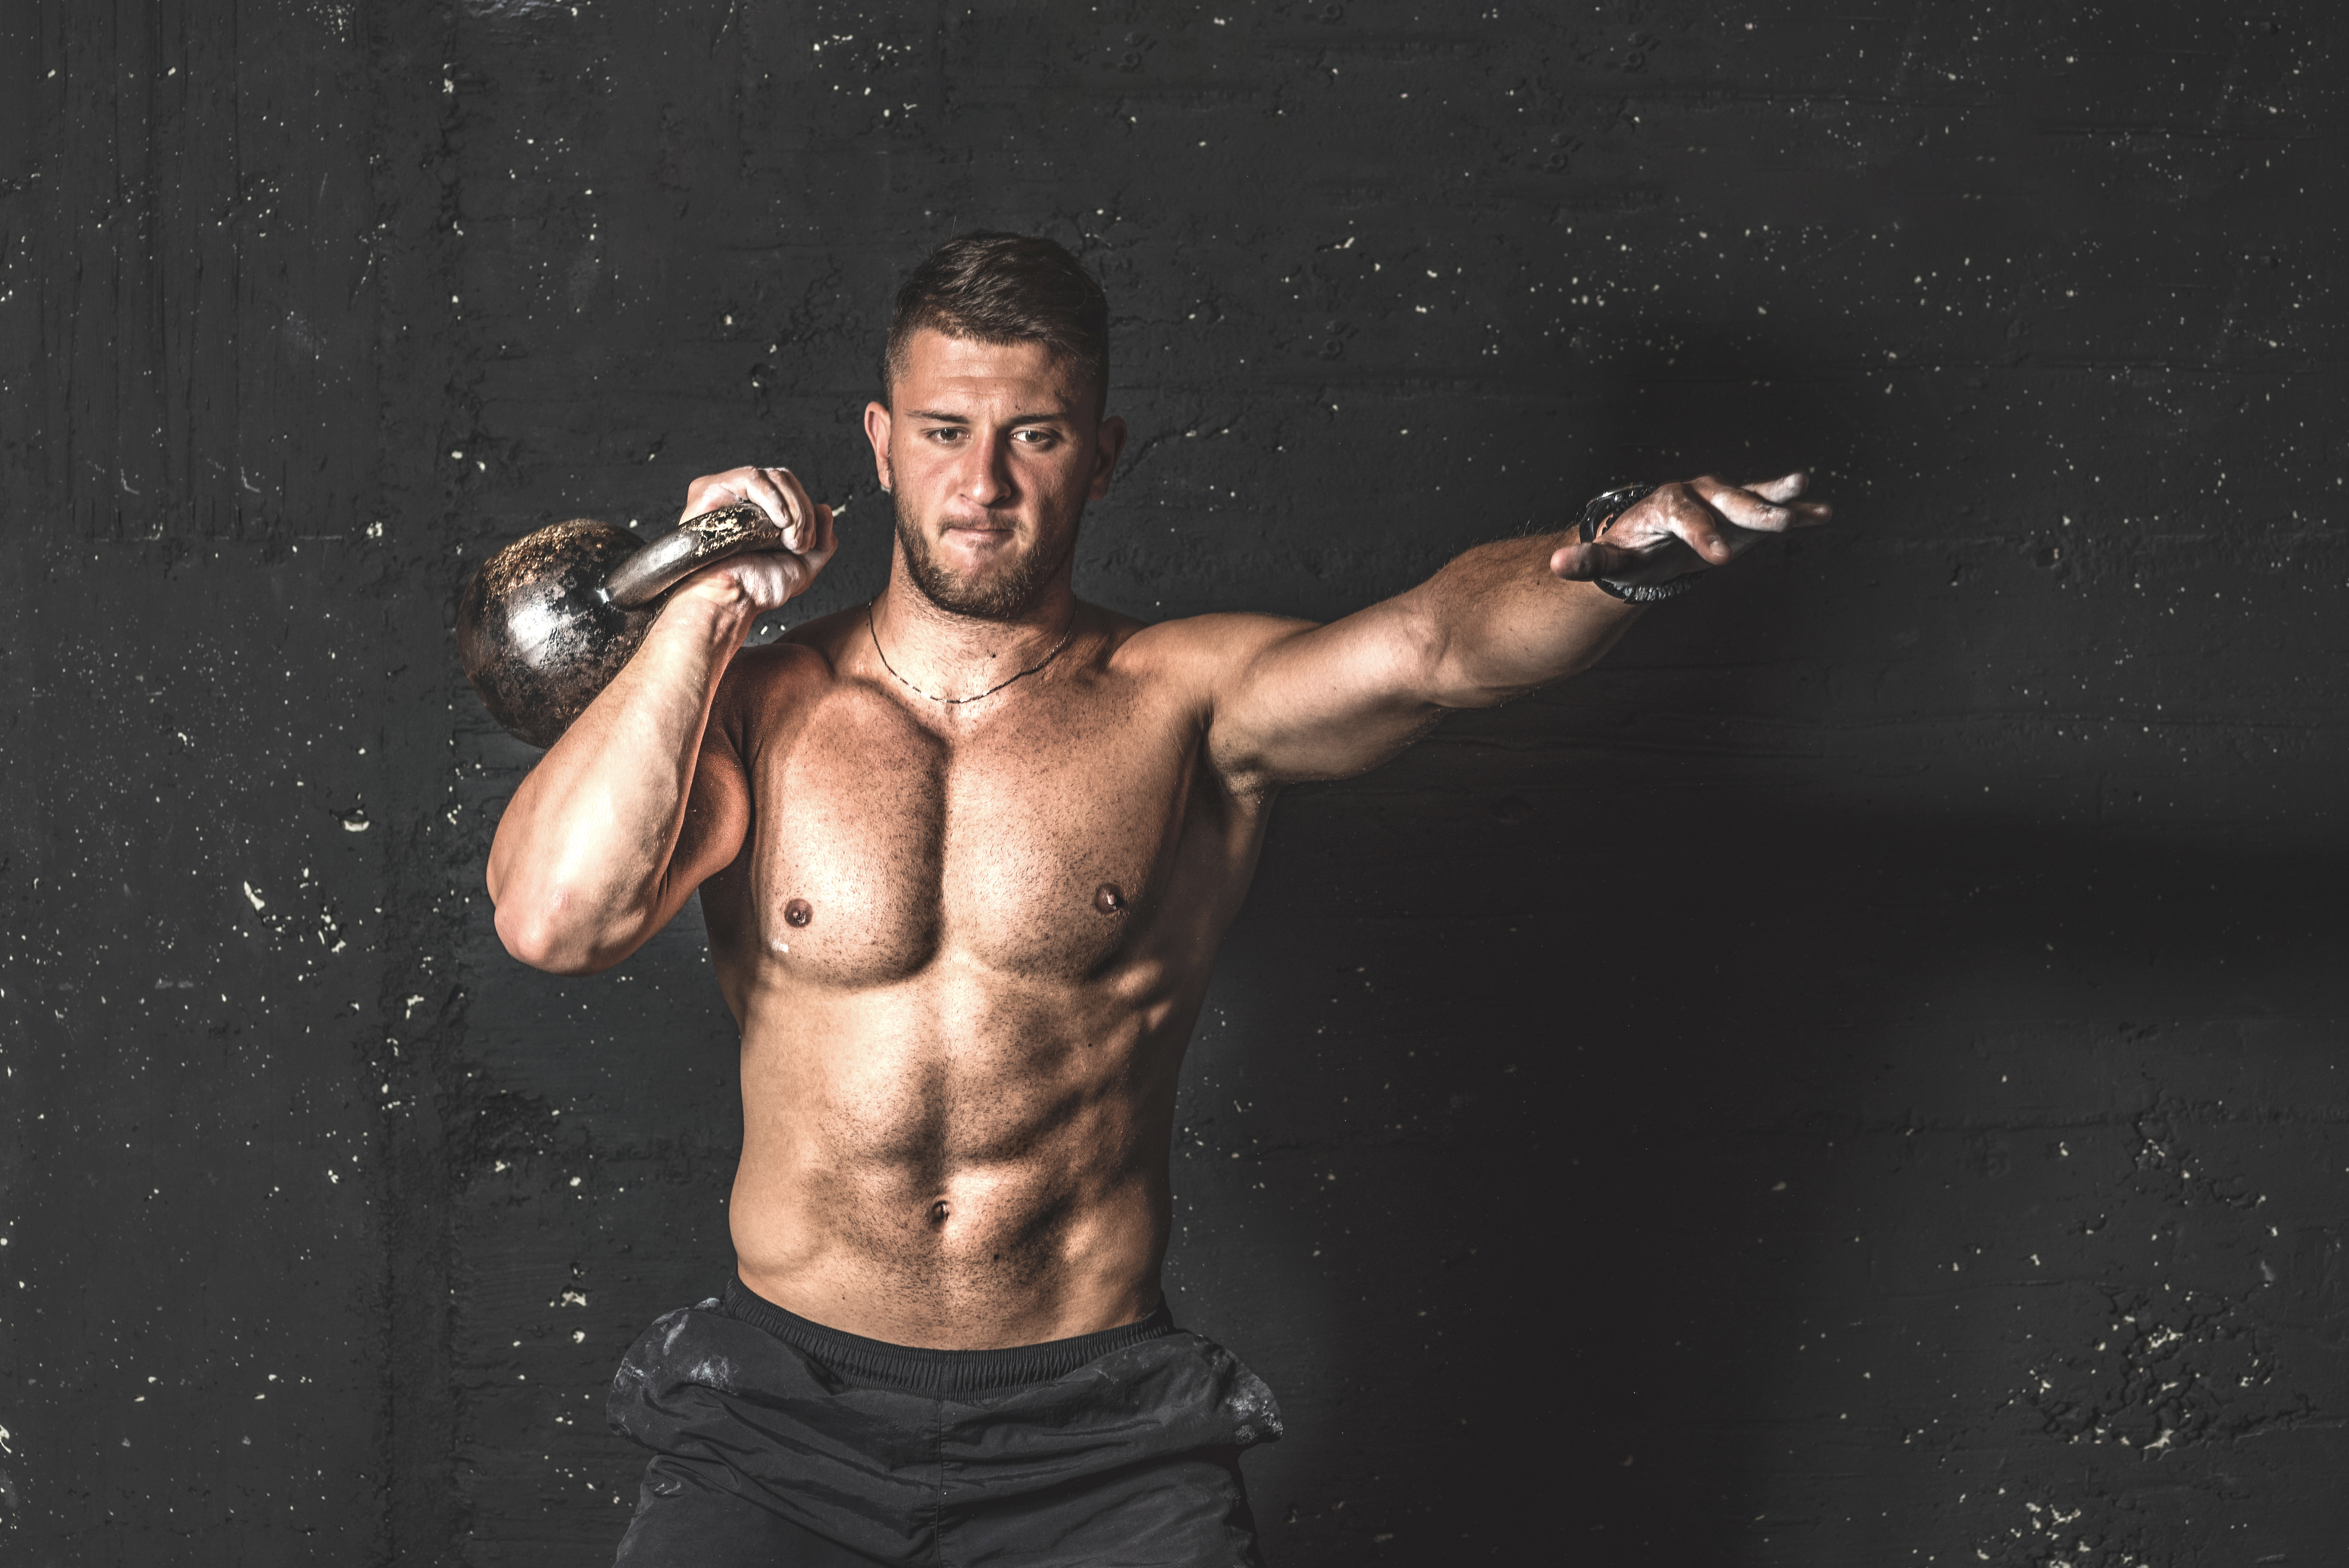 Sow Supersonic hastighed muskel 3 Muscle Building Kettlebell Circuits You Need to Try | BarBend